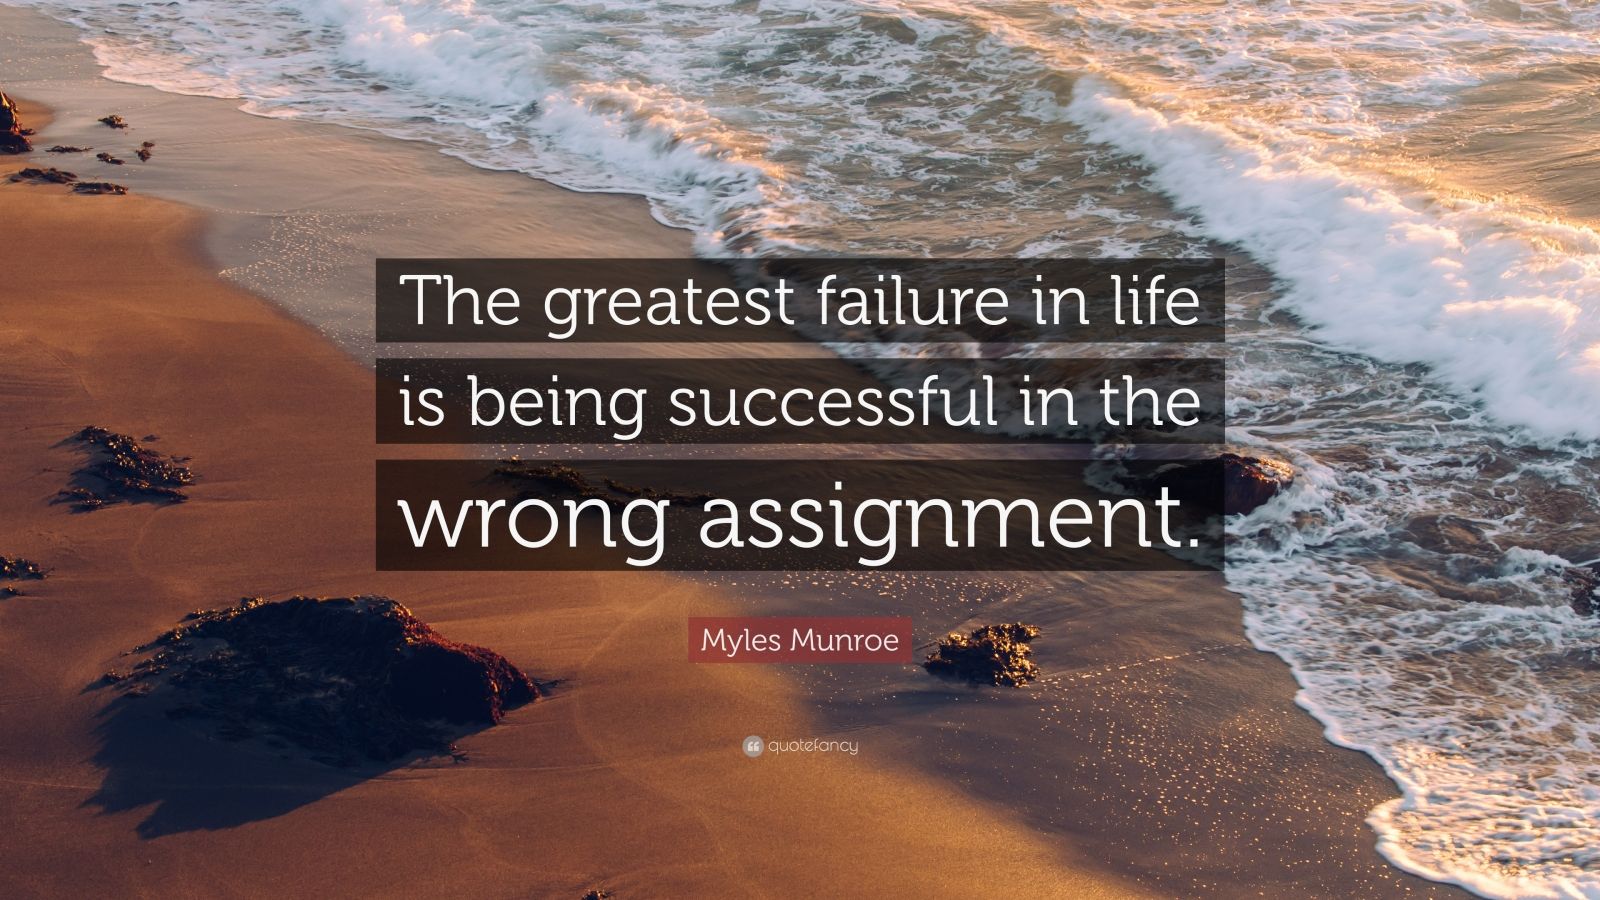 Myles Munroe Quote: “The greatest failure in life is being successful